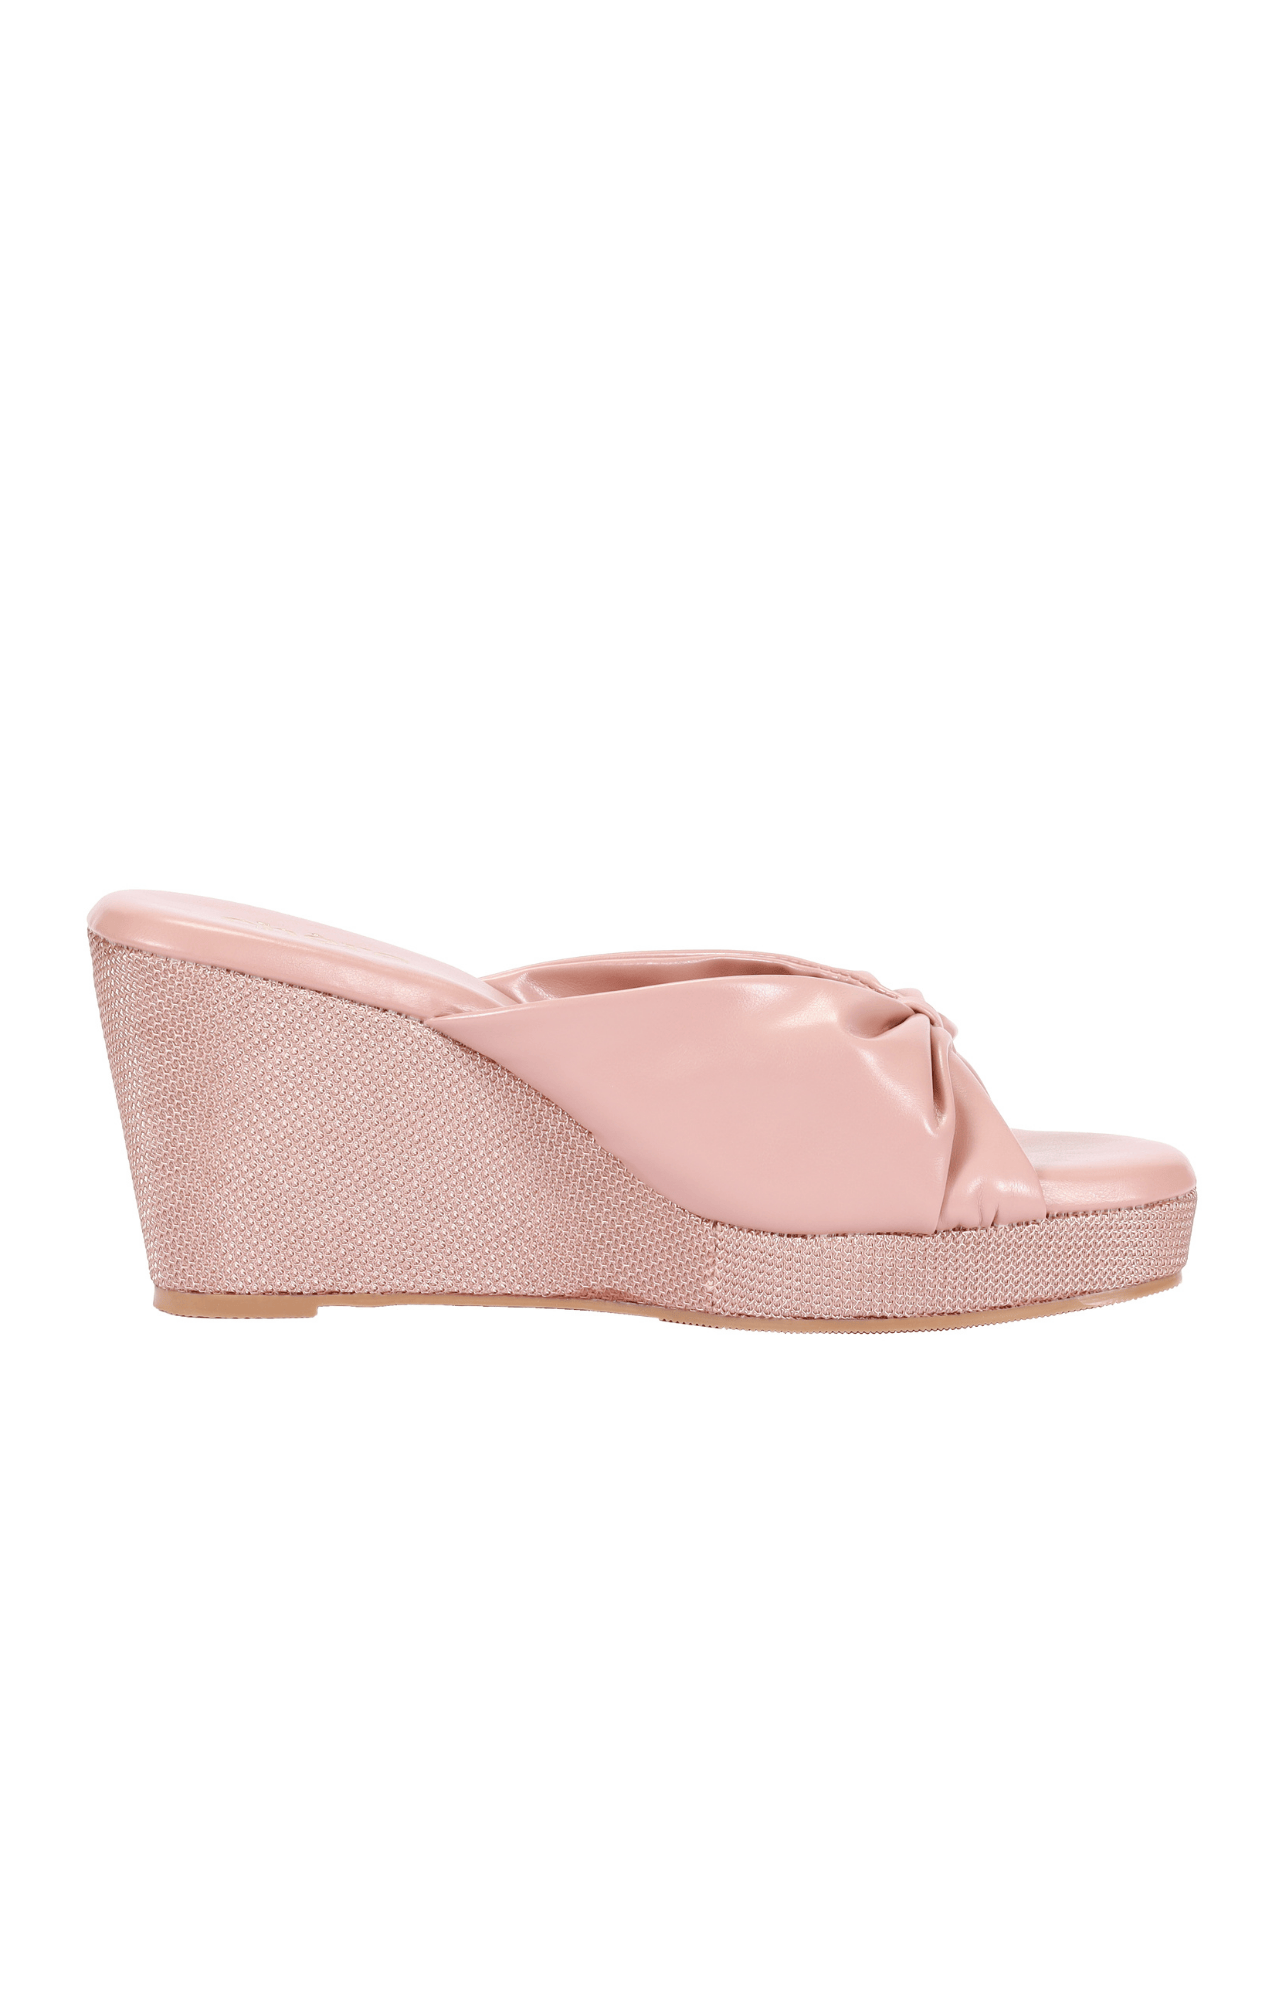 Chere | Women Peach Classic Knot Strap Casual Wedges 2